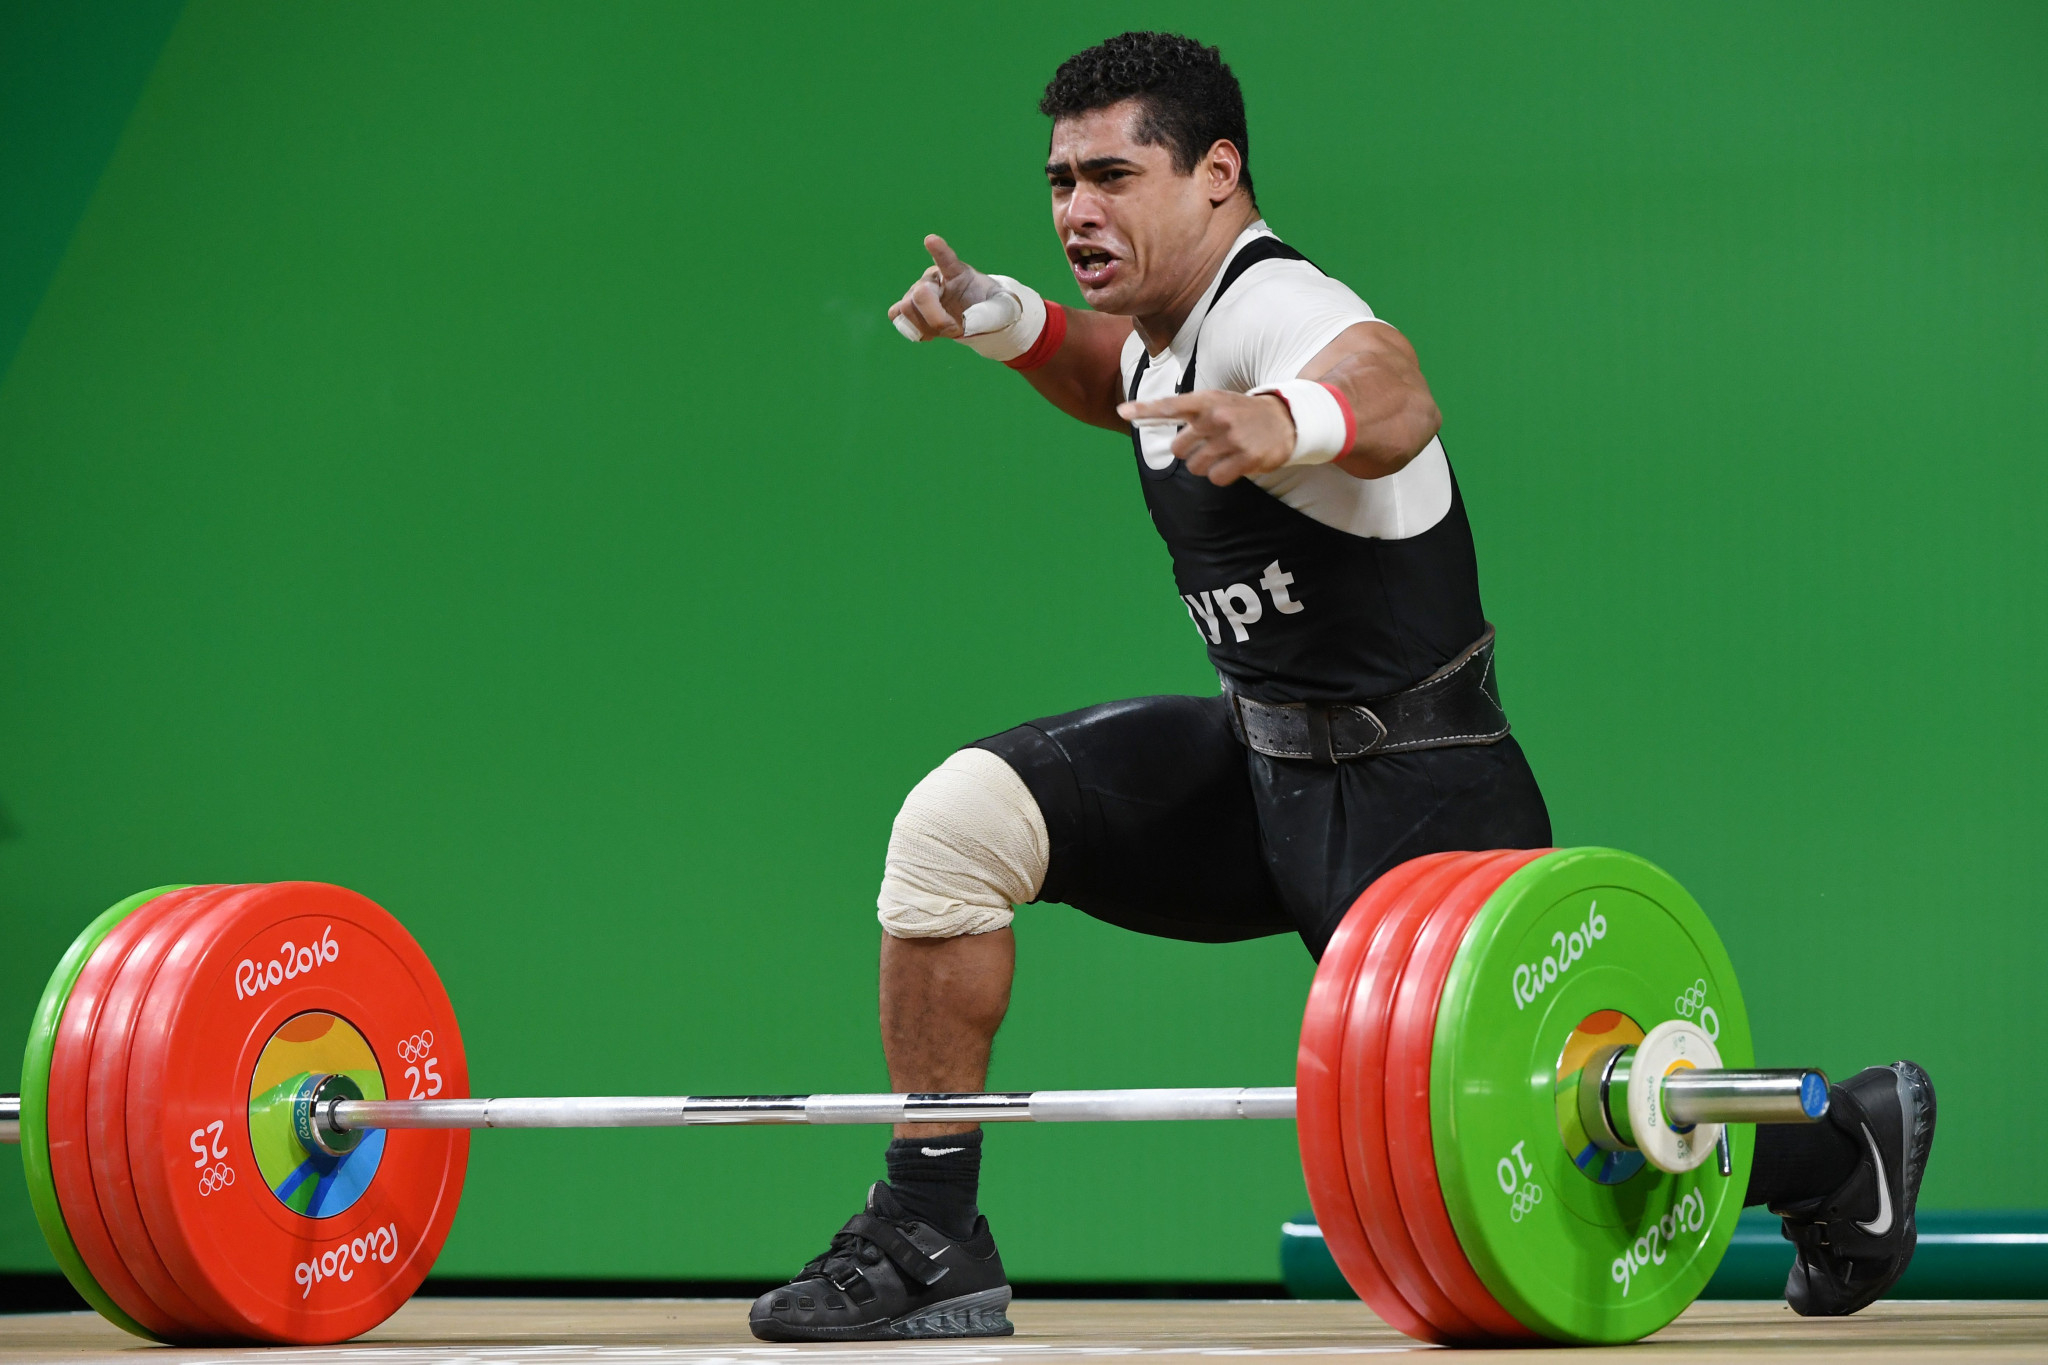 2048x1365 Egypt to pay $160,000 in hope of weightlifting World Championships reprieve